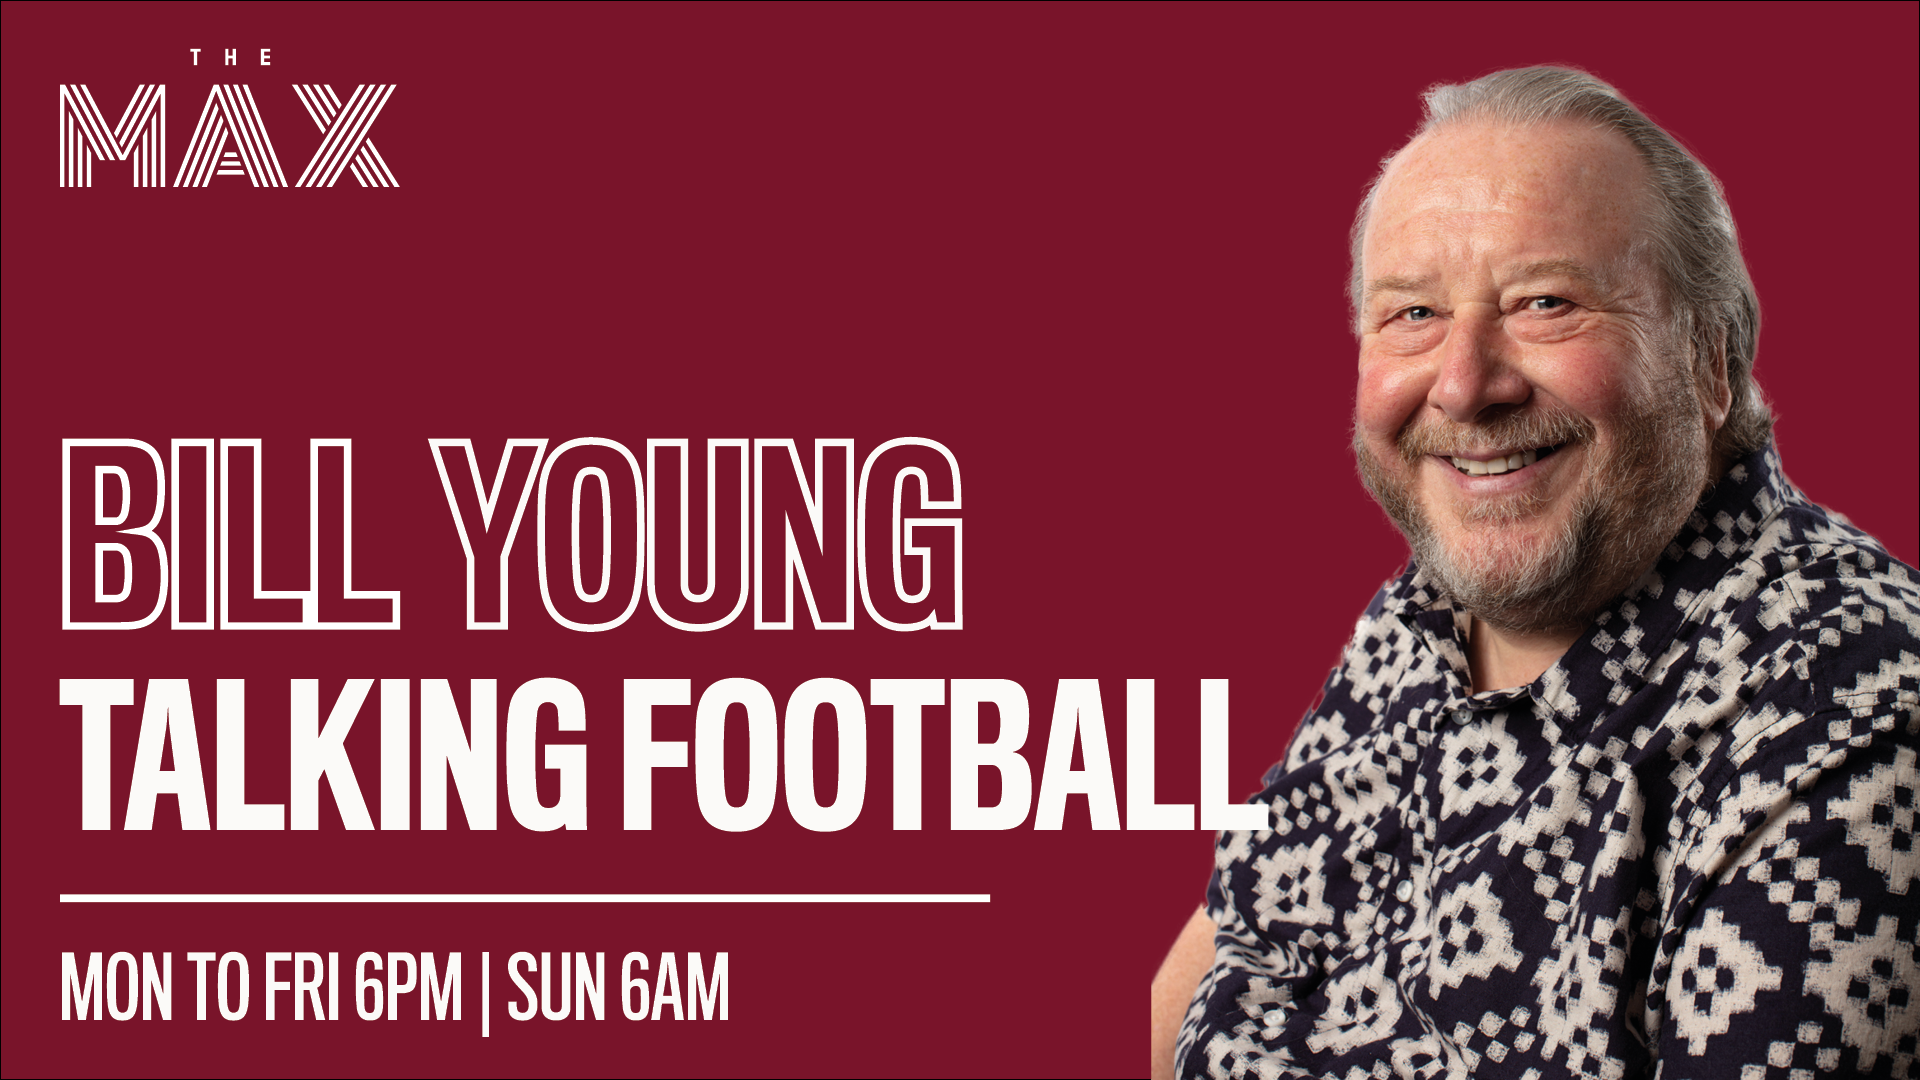 Talking Football with Bill Young - Wednesday 31 March